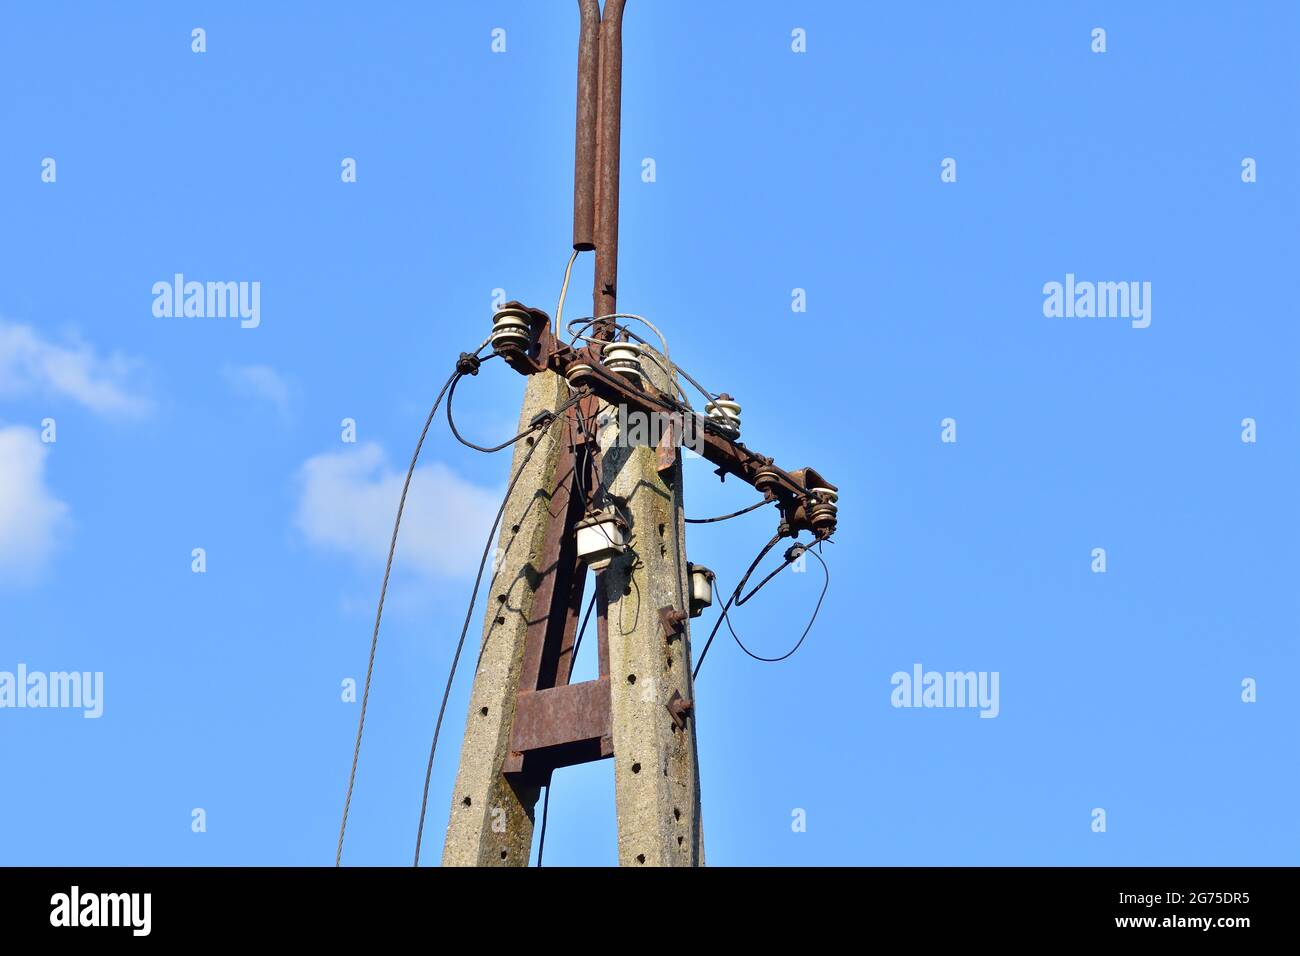 Broken electric wires on the pole and on the lamp. Summer. Stock Photo